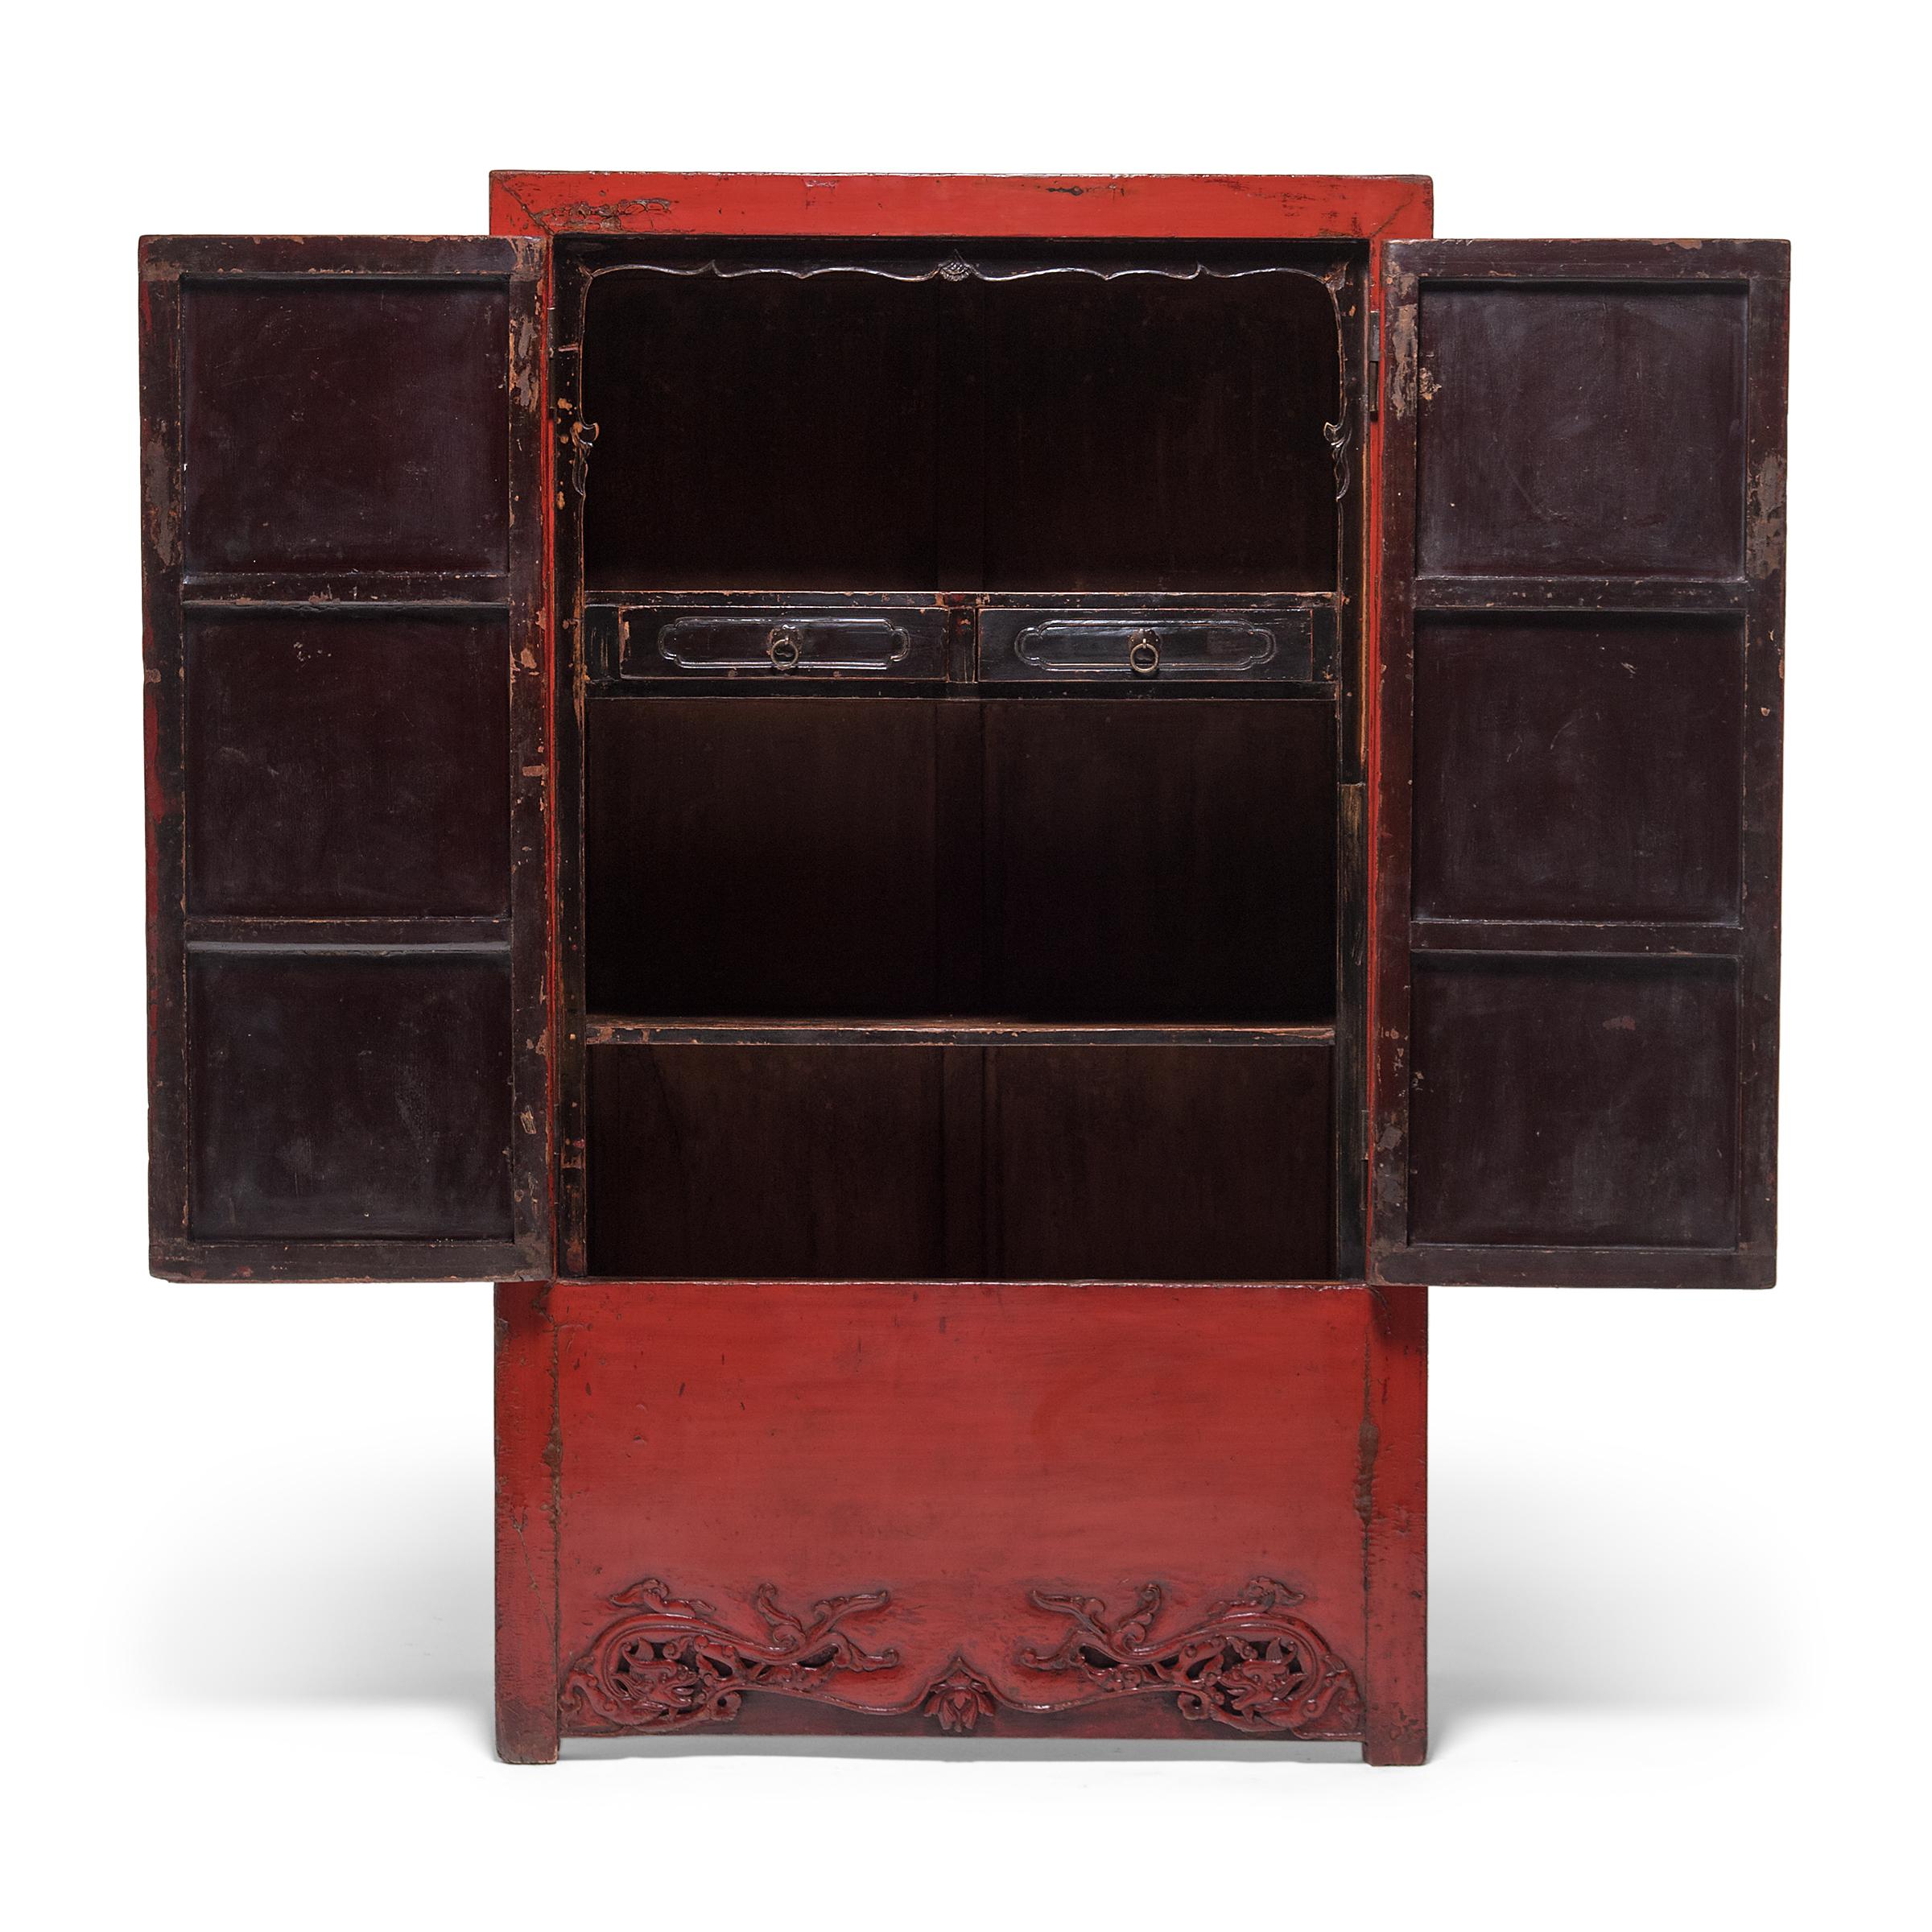 19th Century Chinese Red Lacquer Cabinet, c. 1850